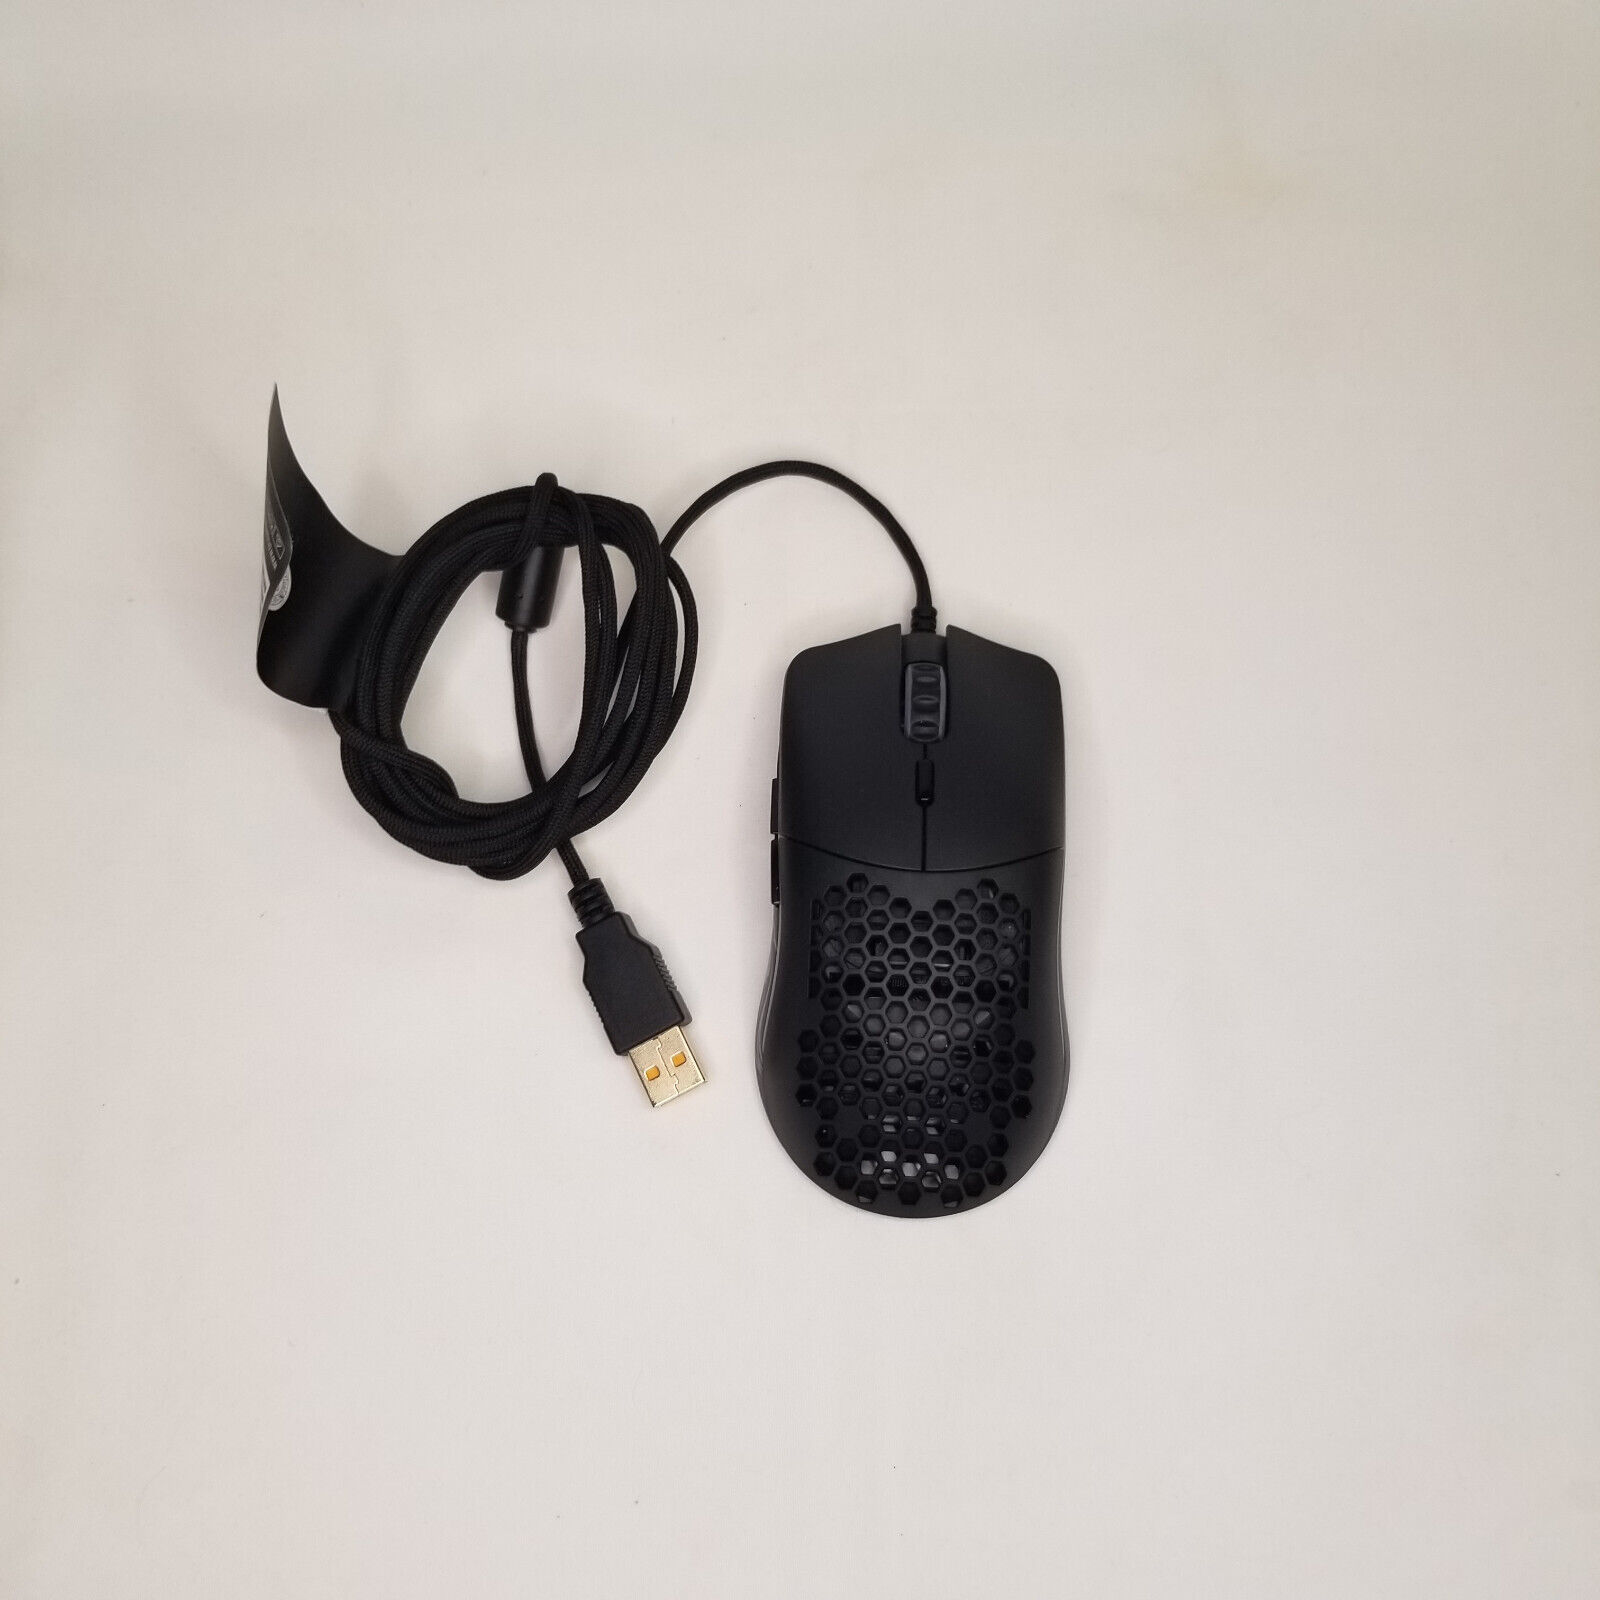 Glorious O- Minus (GOM-BLACK) Wired Gaming Mouse